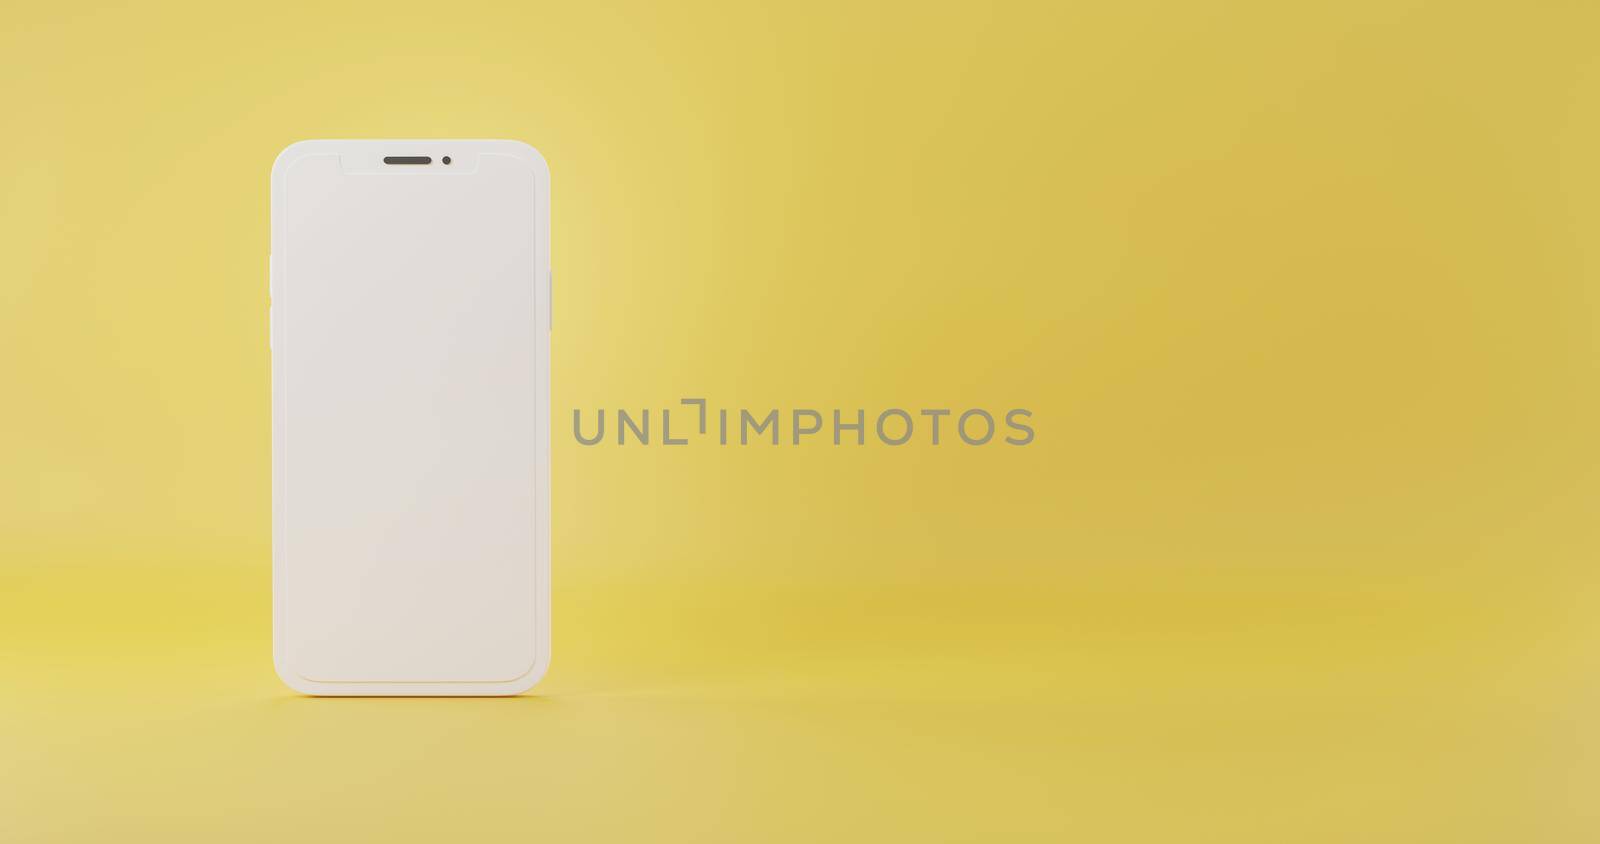 Smartphone golden model mock up white color blank screen render, Minimal mobile phone isolated on yellow background, 3D rendering illustration